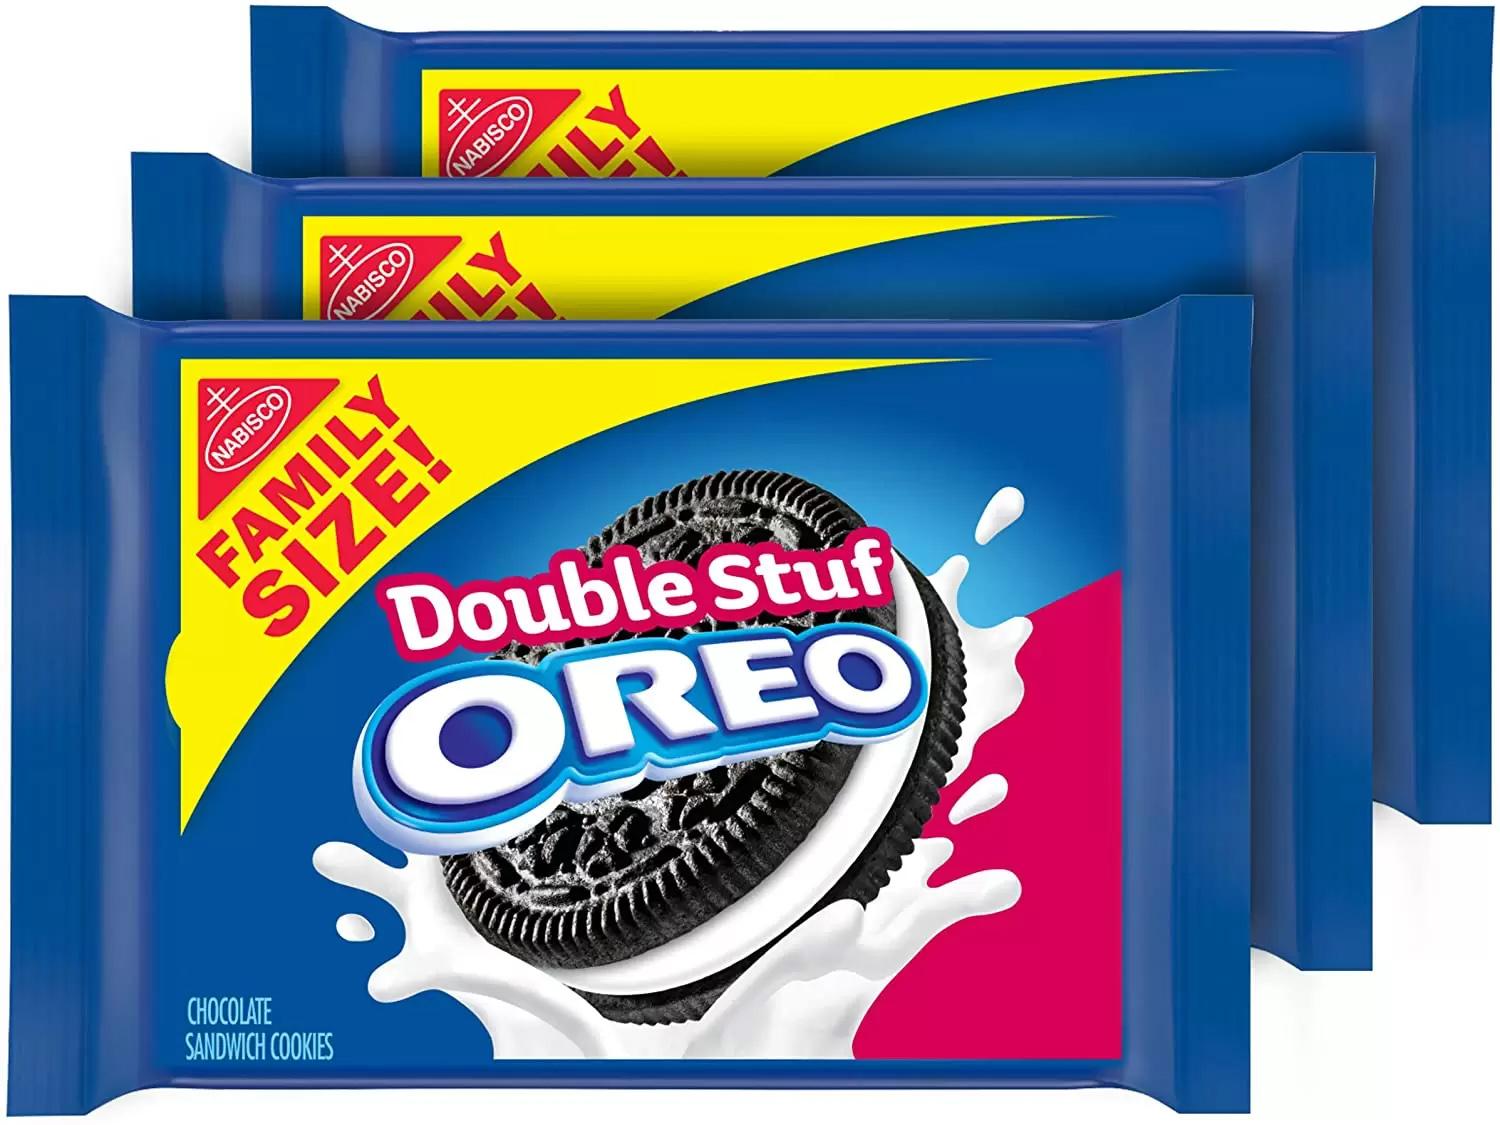 3 Oreo Family Size Double Stuf Chocolate Sandwich Cookies for $7.99 Shipped